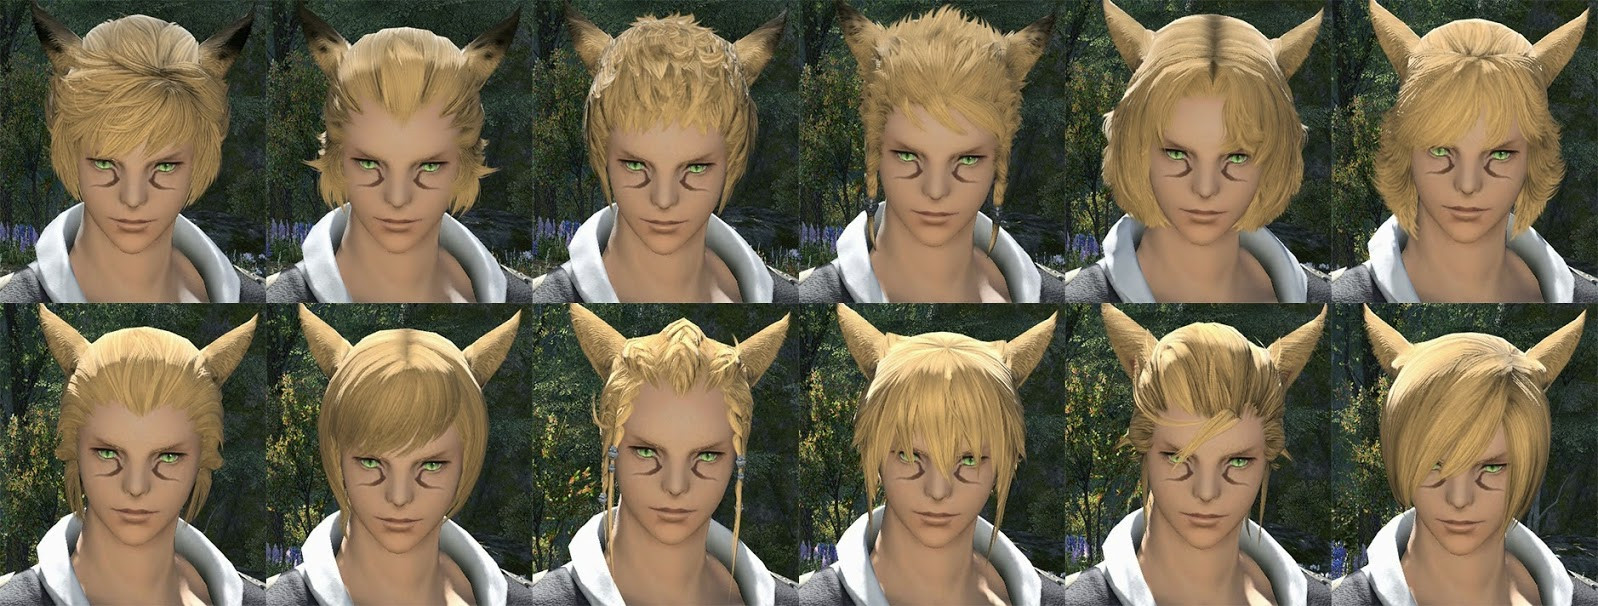 Ffxiv Female Hairstyles
 FFXIV Character Creation – Ald Shot First